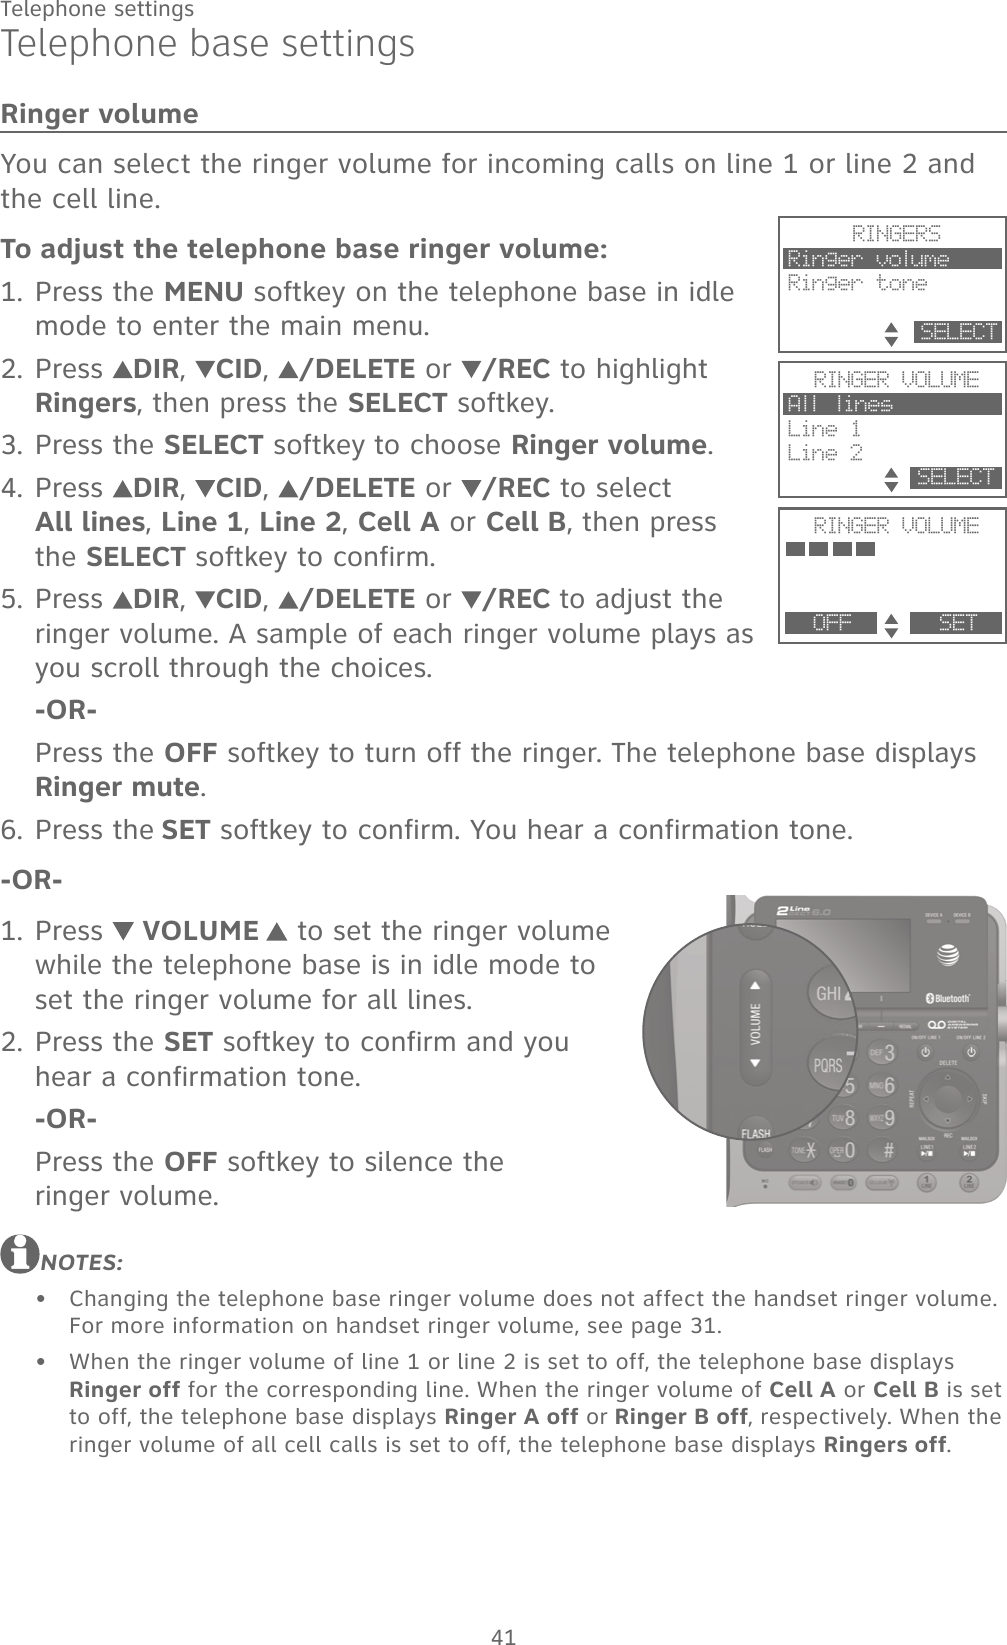 41Telephone settingsTelephone base settingsRinger volumeYou can select the ringer volume for incoming calls on line 1 or line 2 and the cell line.To adjust the telephone base ringer volume:Press the MENU softkey on the telephone base in idle mode to enter the main menu.Press  DIR,  CID,  /DELETE or /REC to highlight Ringers, then press the SELECT softkey.Press the SELECT softkey to choose Ringer volume.Press  DIR,  CID,  /DELETE or /REC to select  All lines, Line 1, Line 2, Cell A or Cell B, then press the SELECT softkey to confirm.Press  DIR,  CID,  /DELETE or /REC to adjust the ringer volume. A sample of each ringer volume plays as you scroll through the choices.-OR-Press the OFF softkey to turn off the ringer. The telephone base displays Ringer mute.Press the SET softkey to confirm. You hear a confirmation tone.-OR-Press   VOLUME   to set the ringer volume while the telephone base is in idle mode to set the ringer volume for all lines.Press the SET softkey to confirm and you hear a confirmation tone.-OR-Press the OFF softkey to silence the  ringer volume.NOTES:Changing the telephone base ringer volume does not affect the handset ringer volume. For more information on handset ringer volume, see page 31.When the ringer volume of line 1 or line 2 is set to off, the telephone base displays Ringer off for the corresponding line. When the ringer volume of Cell A or Cell B is set to off, the telephone base displays Ringer A off or Ringer B off, respectively. When the ringer volume of all cell calls is set to off, the telephone base displays Ringers off.1.2.3.4.5.6.1.2.••RINGERSRinger volumeRinger tone         SELECTRINGER VOLUMEAll line sLine 1Line 2           SELECTRINGER VOLUMEPhone memory   OFF       SET